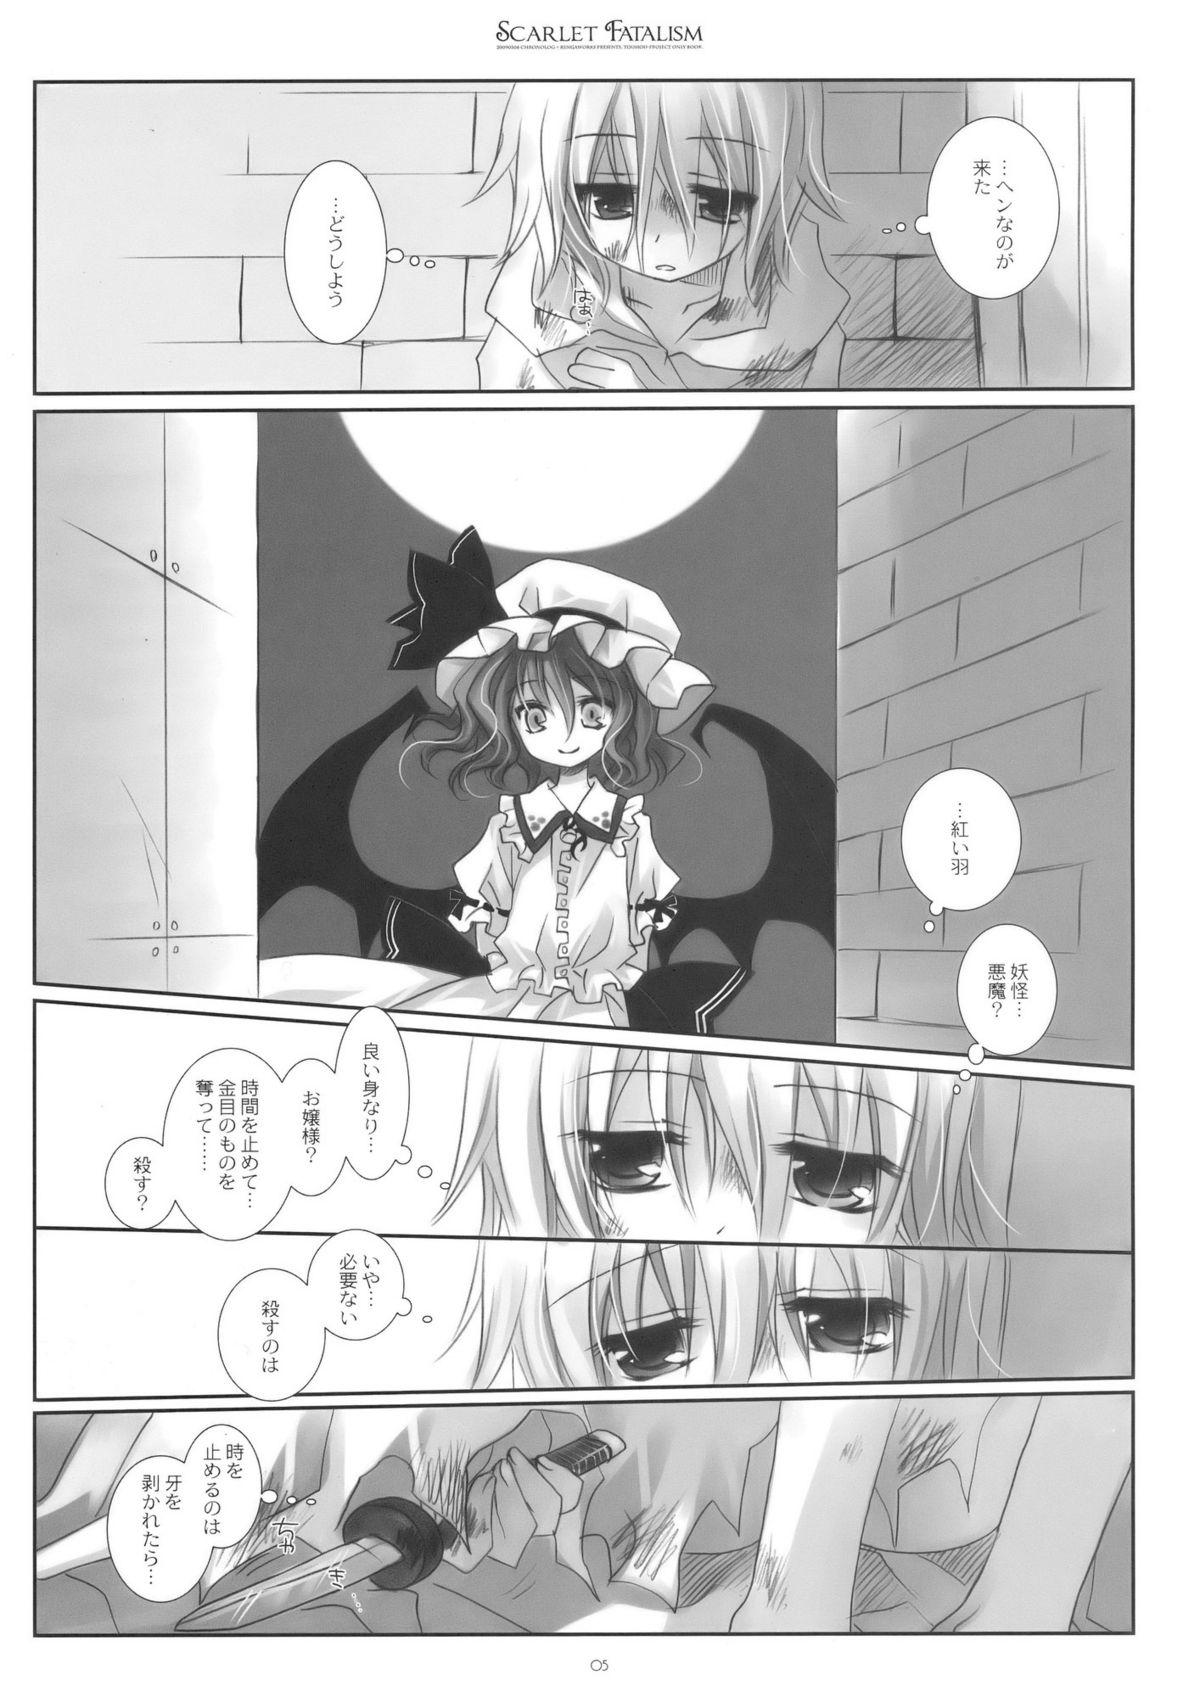 Blowjob Scarlet Fatalism - Touhou project Tinytits - Page 5